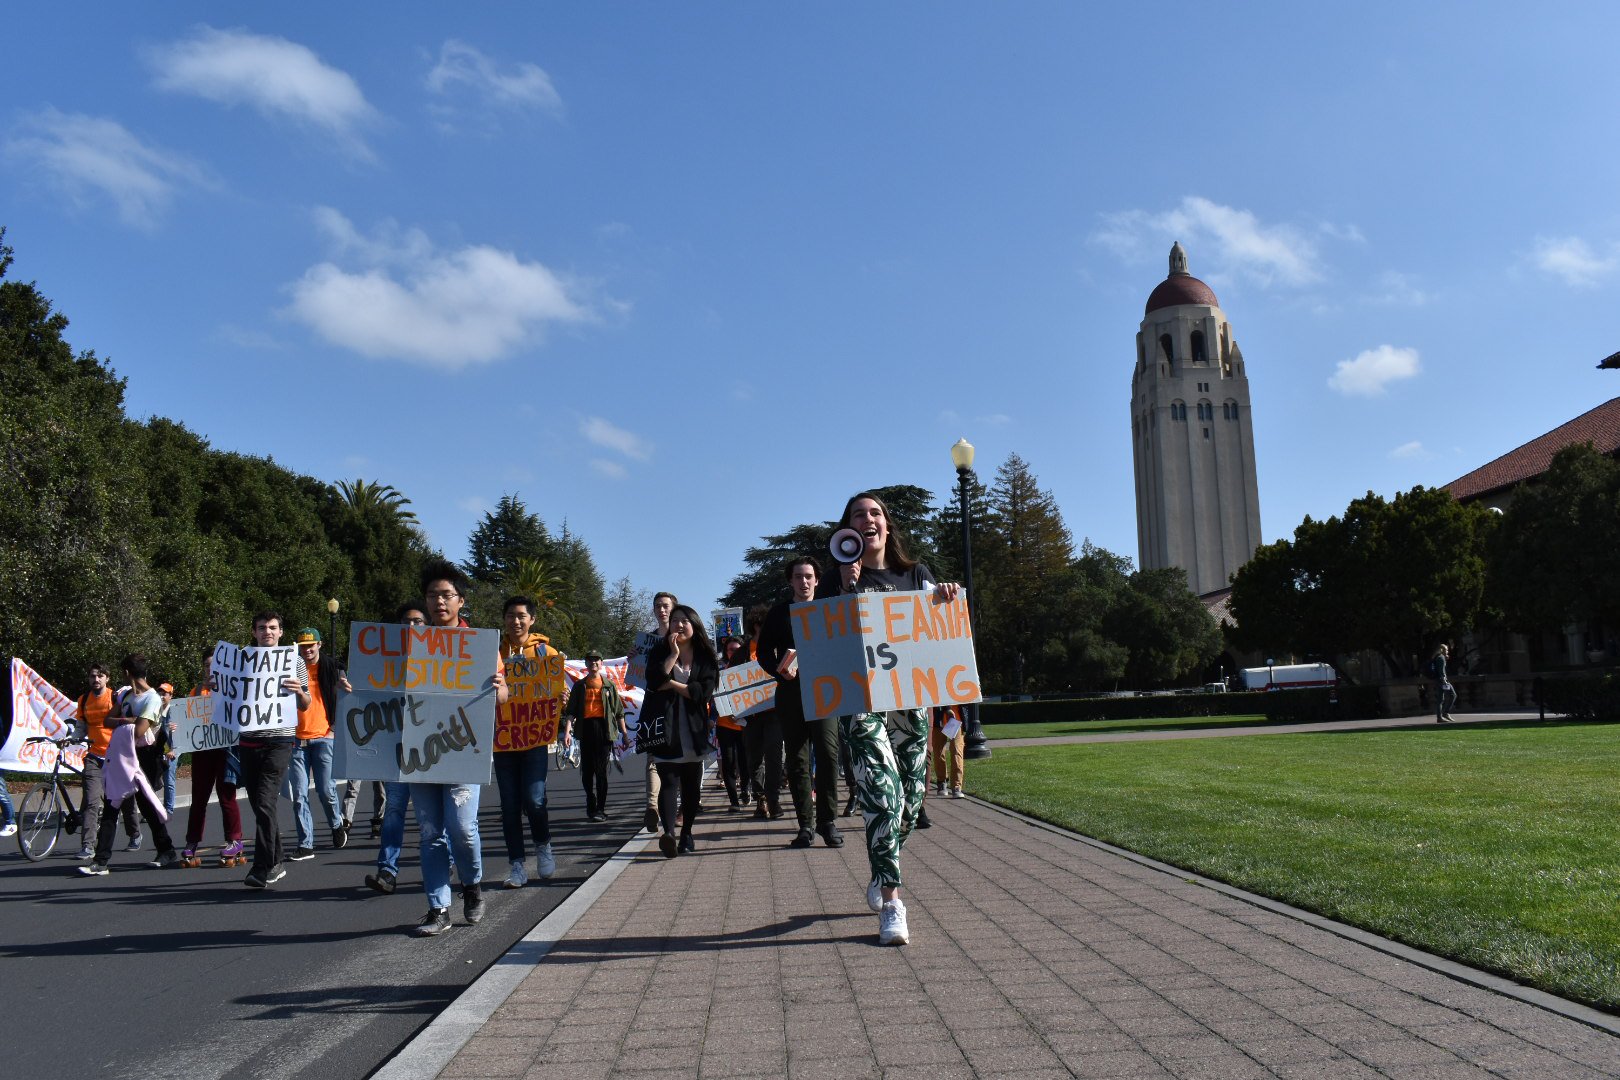 Calling on Stanford to divest from fossil fuels, students marched from White Plaza to Main Quad in February. Pictured are the students as they march down Jane Stanford Way in front of Main Quad.